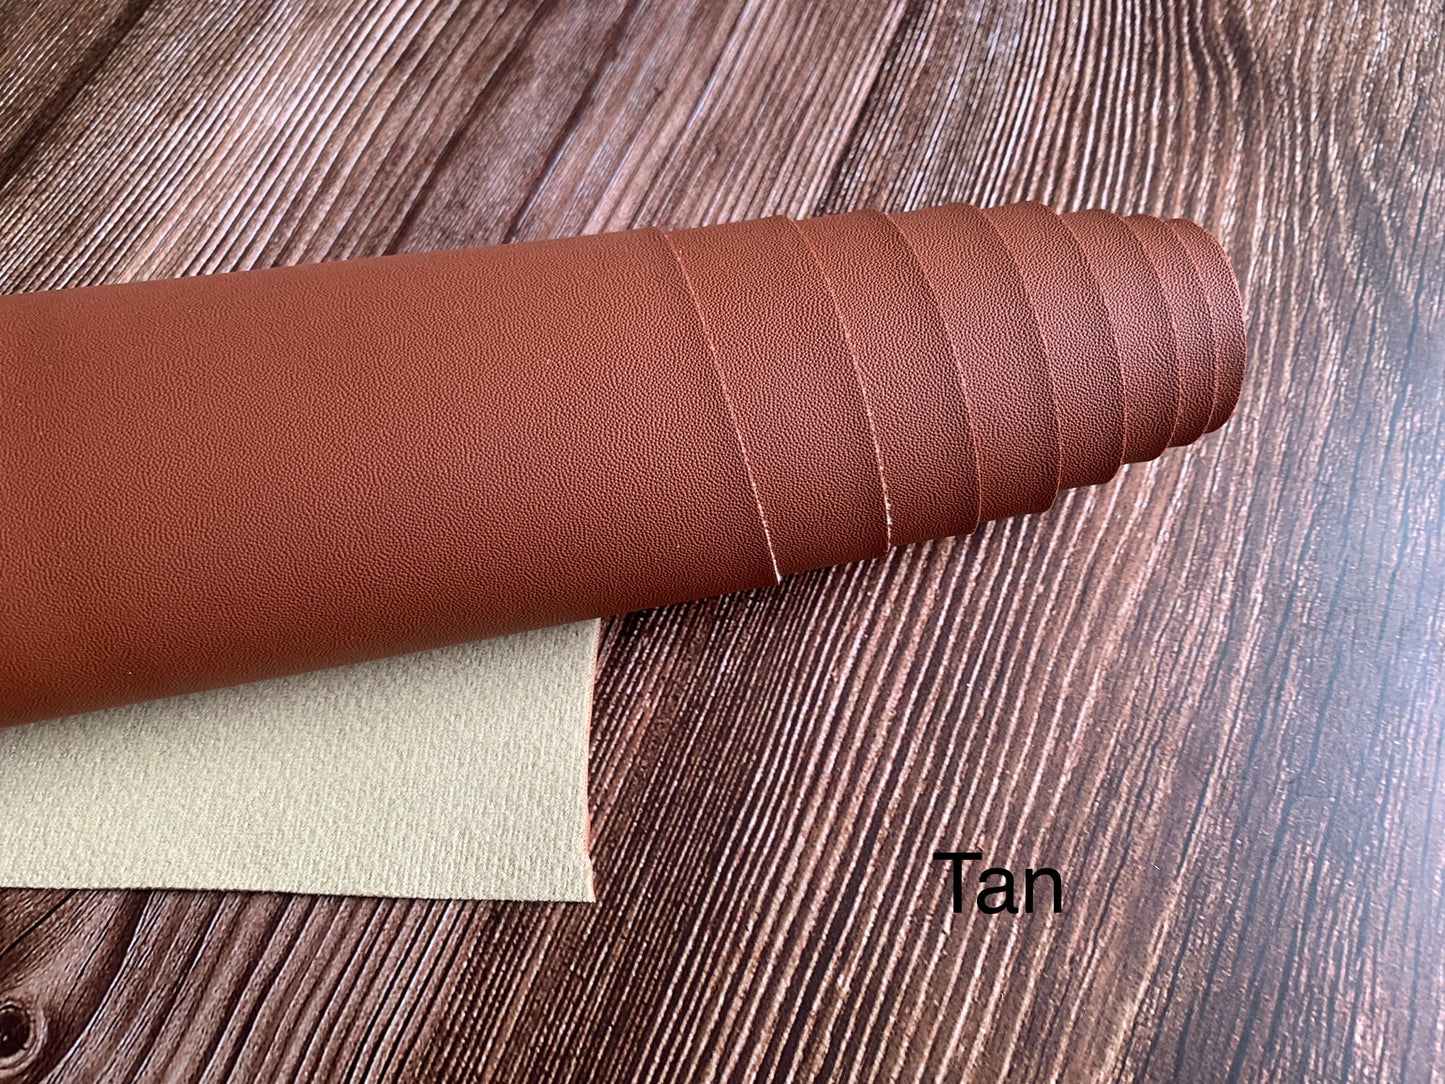 Smooth & Soft vinyl, sold faux leather, vegan leather, synthetic leather for bag making, shoes, garments, home decor etc.